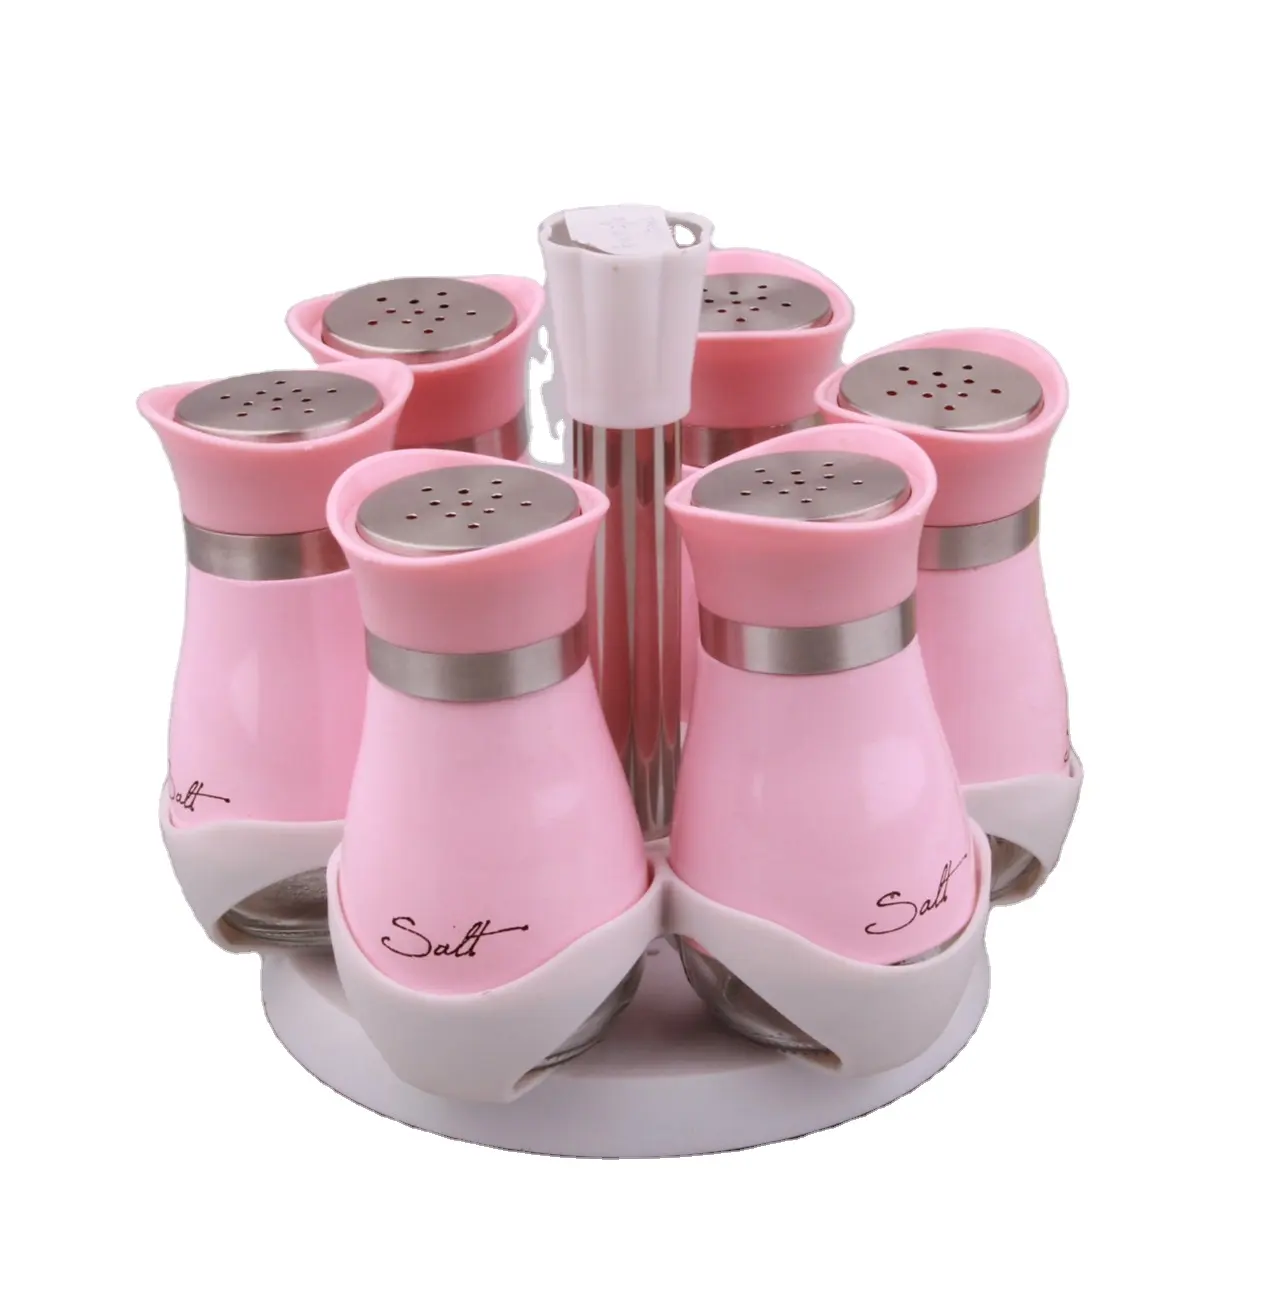 Wholesale best supplier set of 6pcs pink glass pepper spice jar rack set kitchen glass food container for home kitchen decor